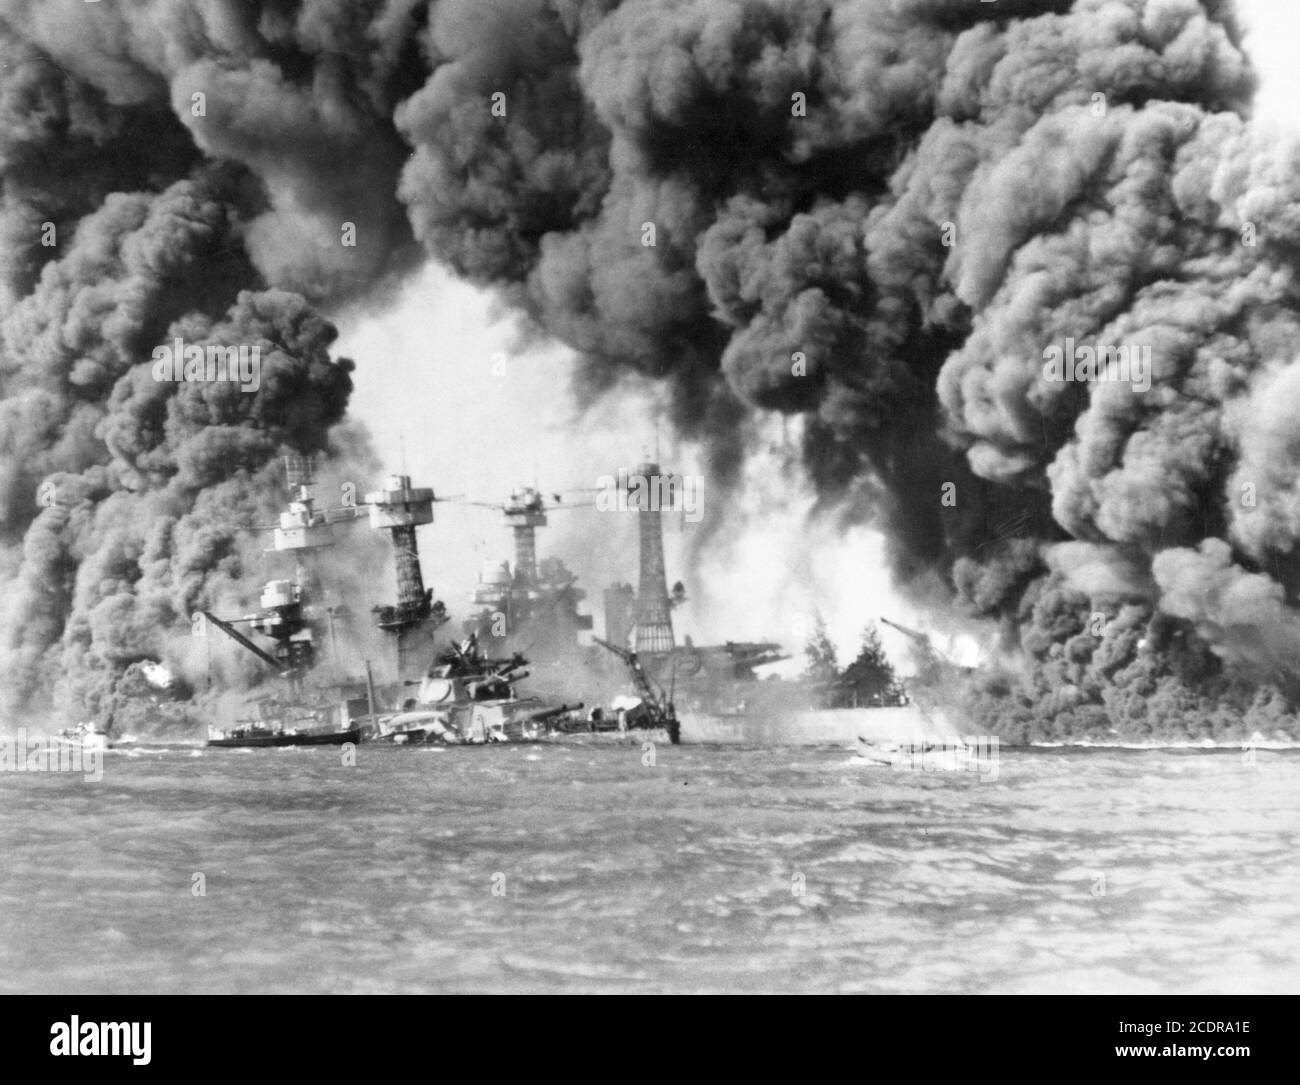 Pearl Harbor 1941. Photograph of the USS West Virginia and the USS Tennessee after the Japanese attack on Pearl Harbor, December 7, 1941. Stock Photo